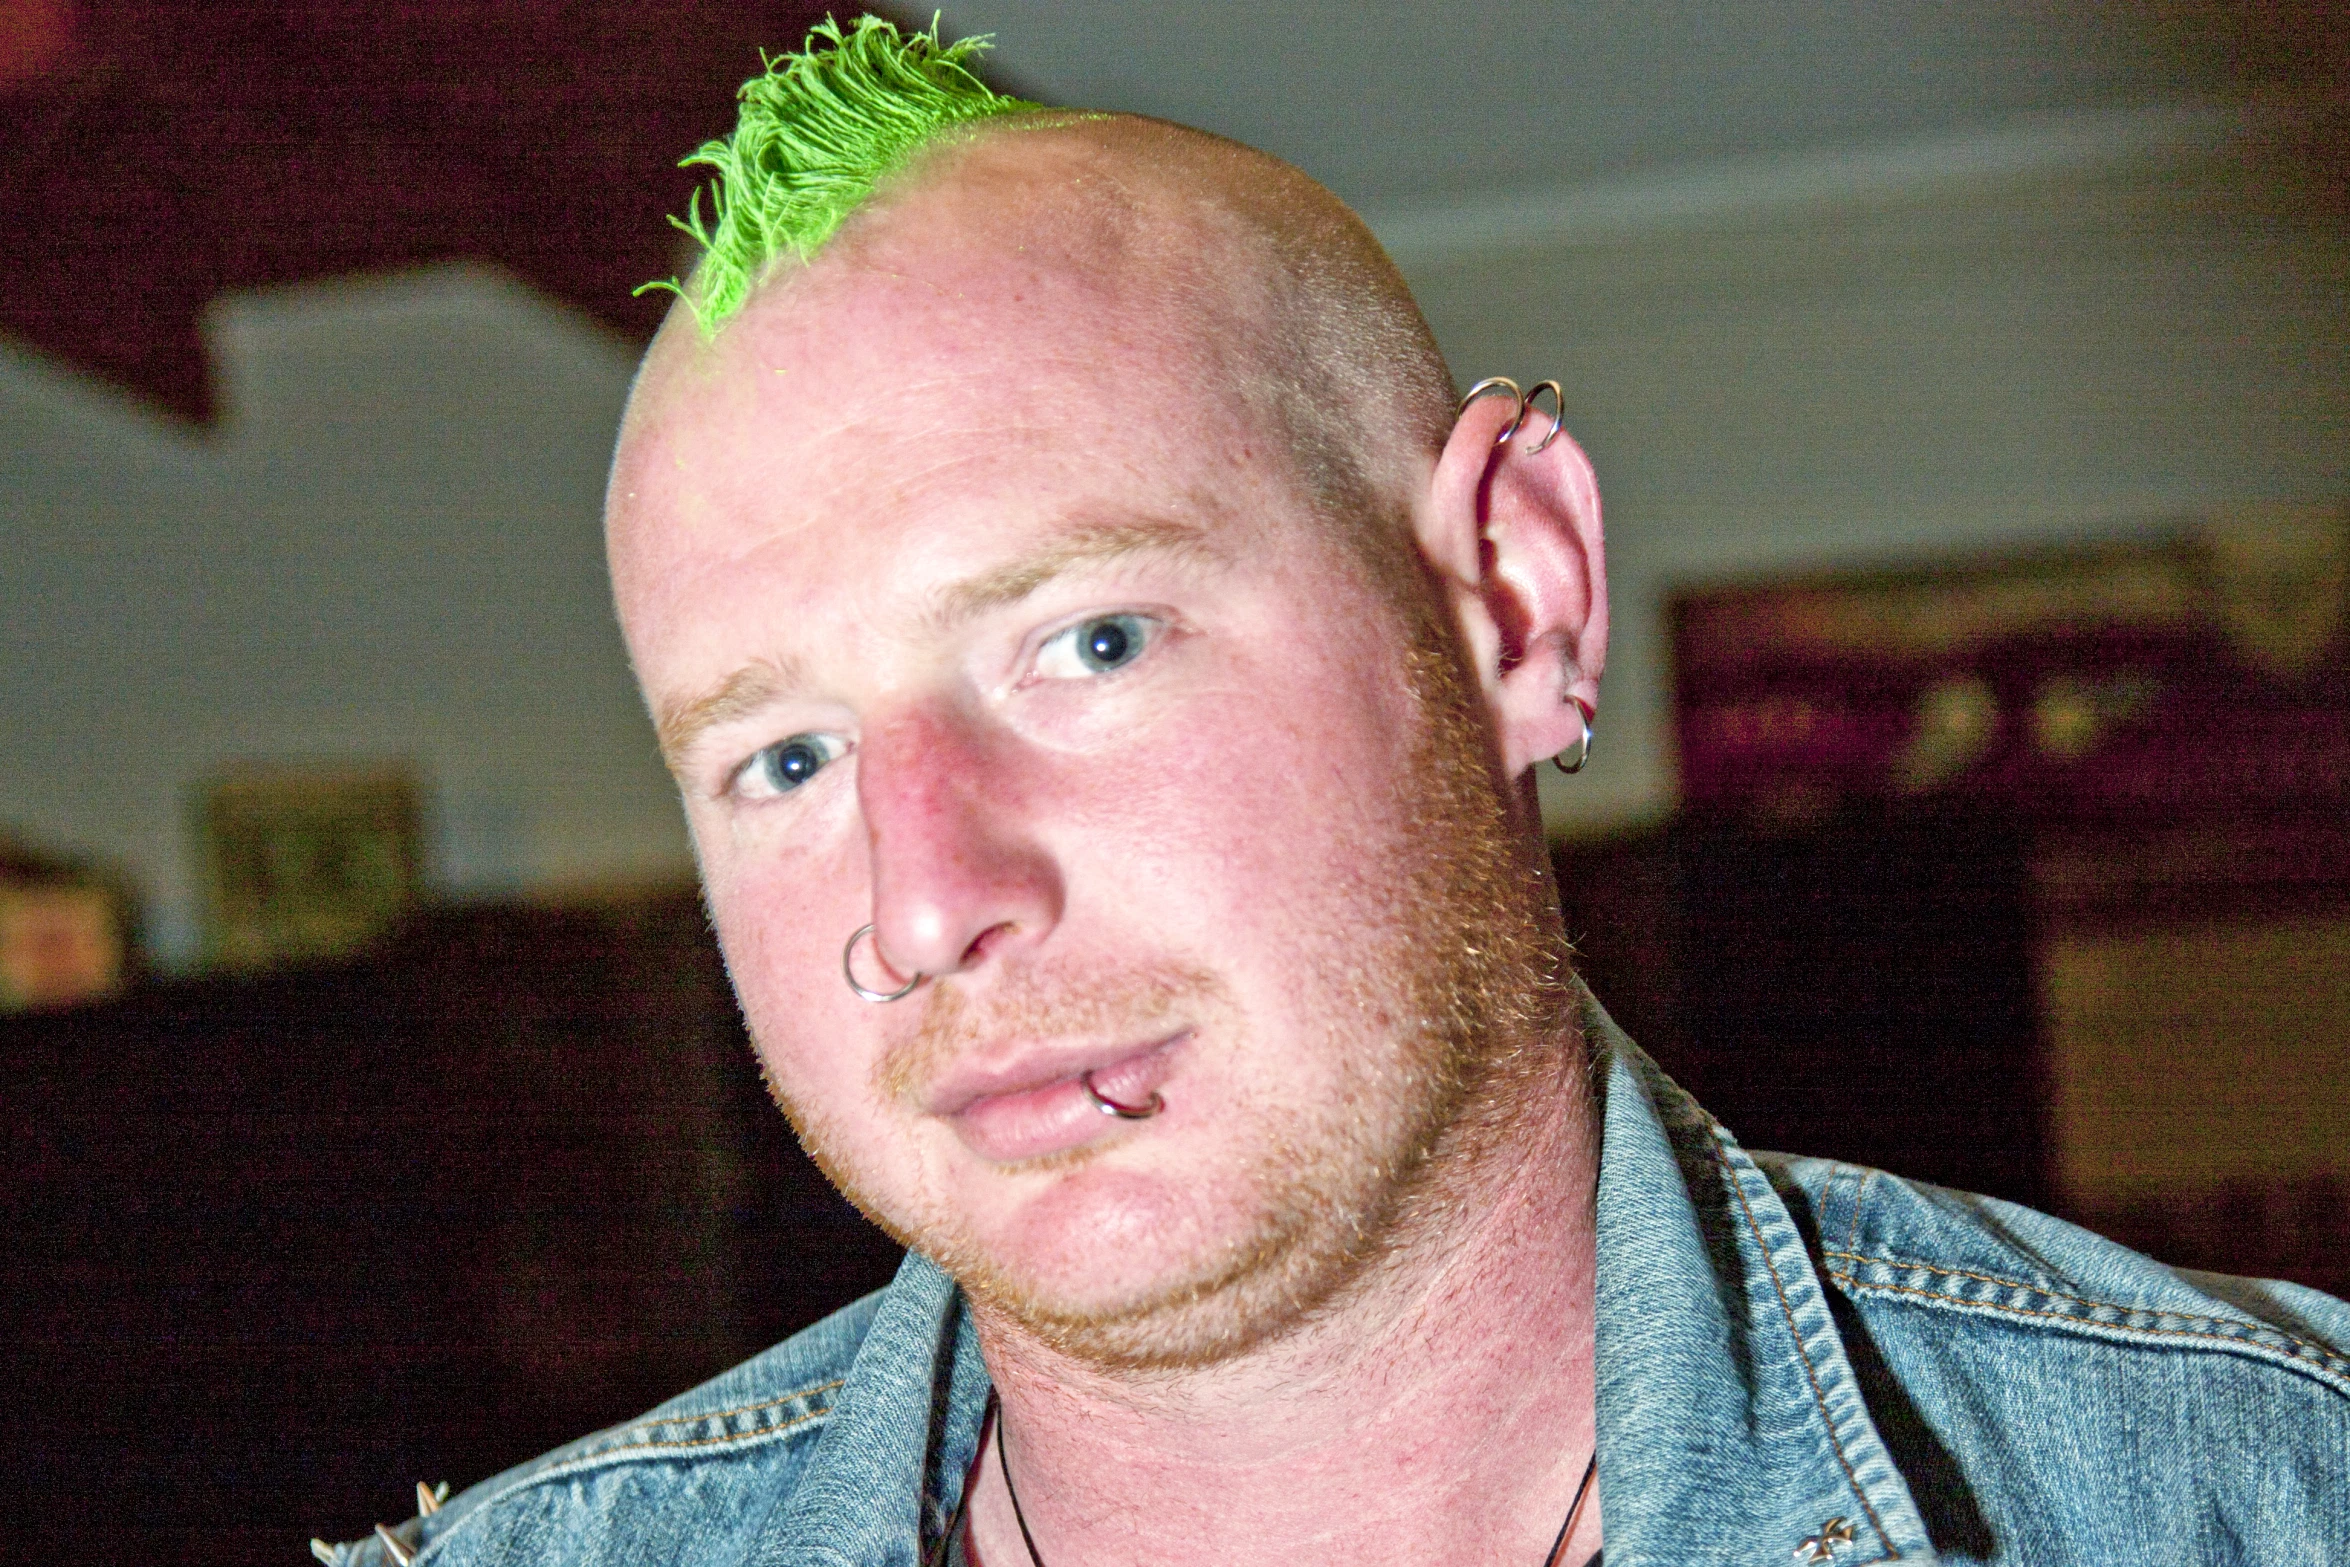 a young man with punk hair is looking at the camera